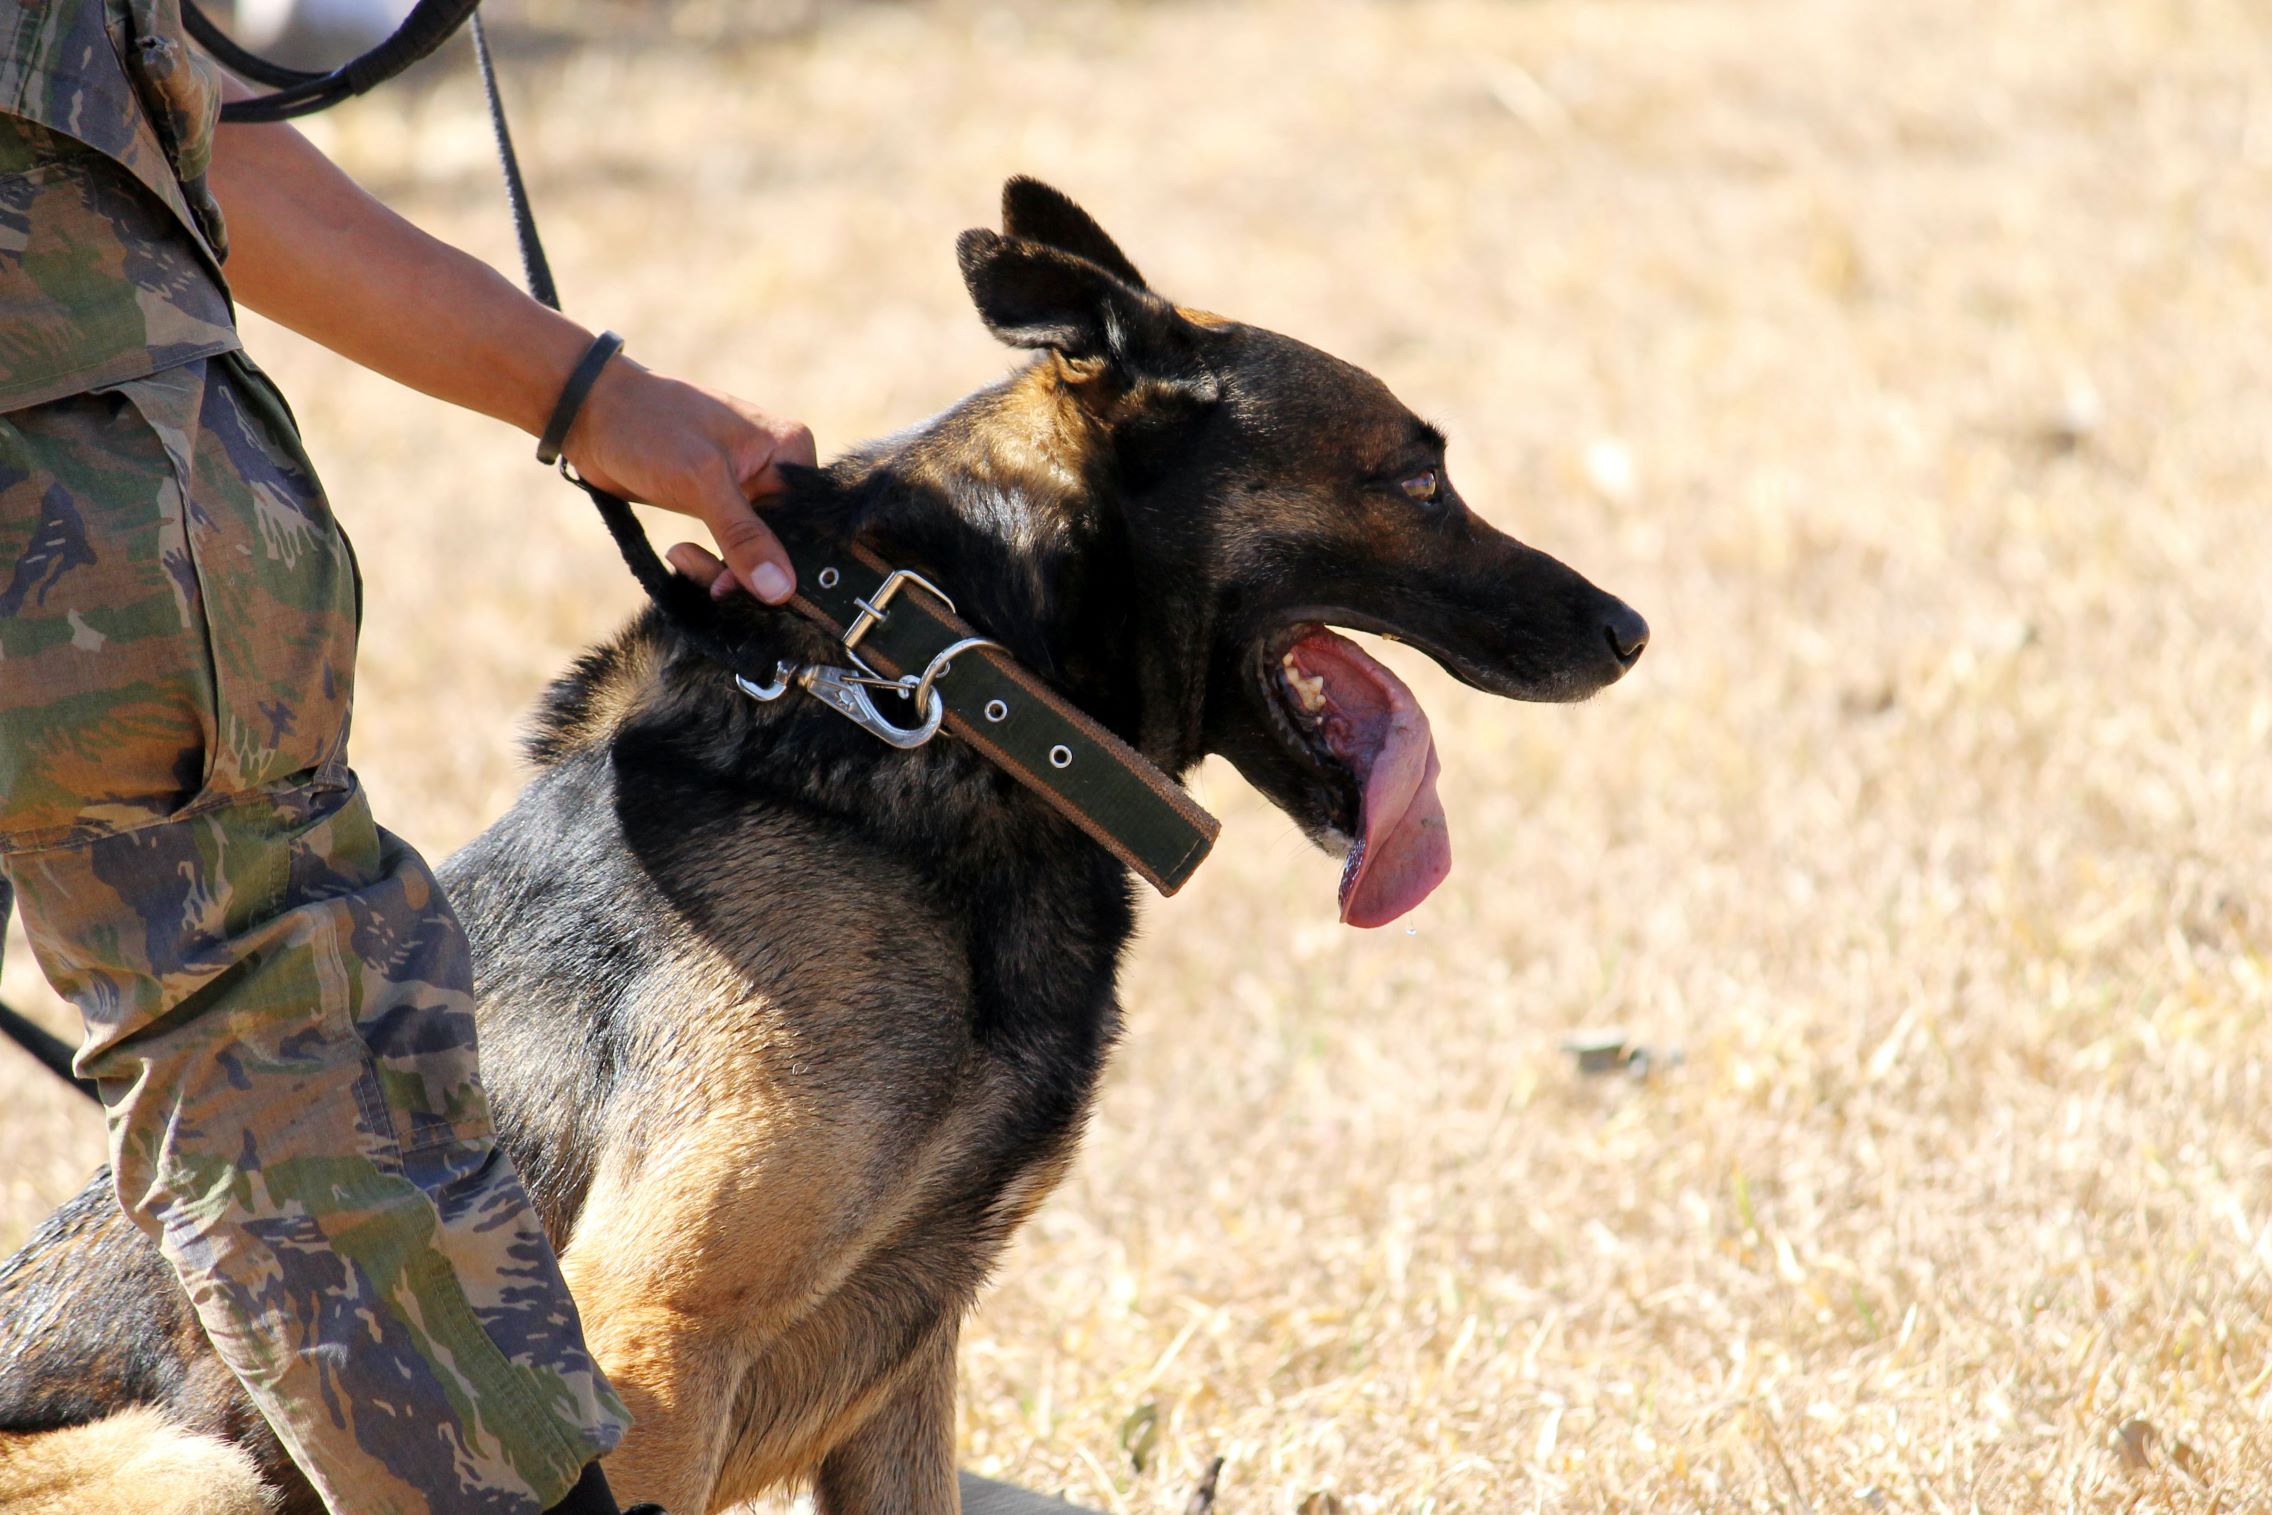 Unleashing Heroes - The Role of Dogs in the Police Force